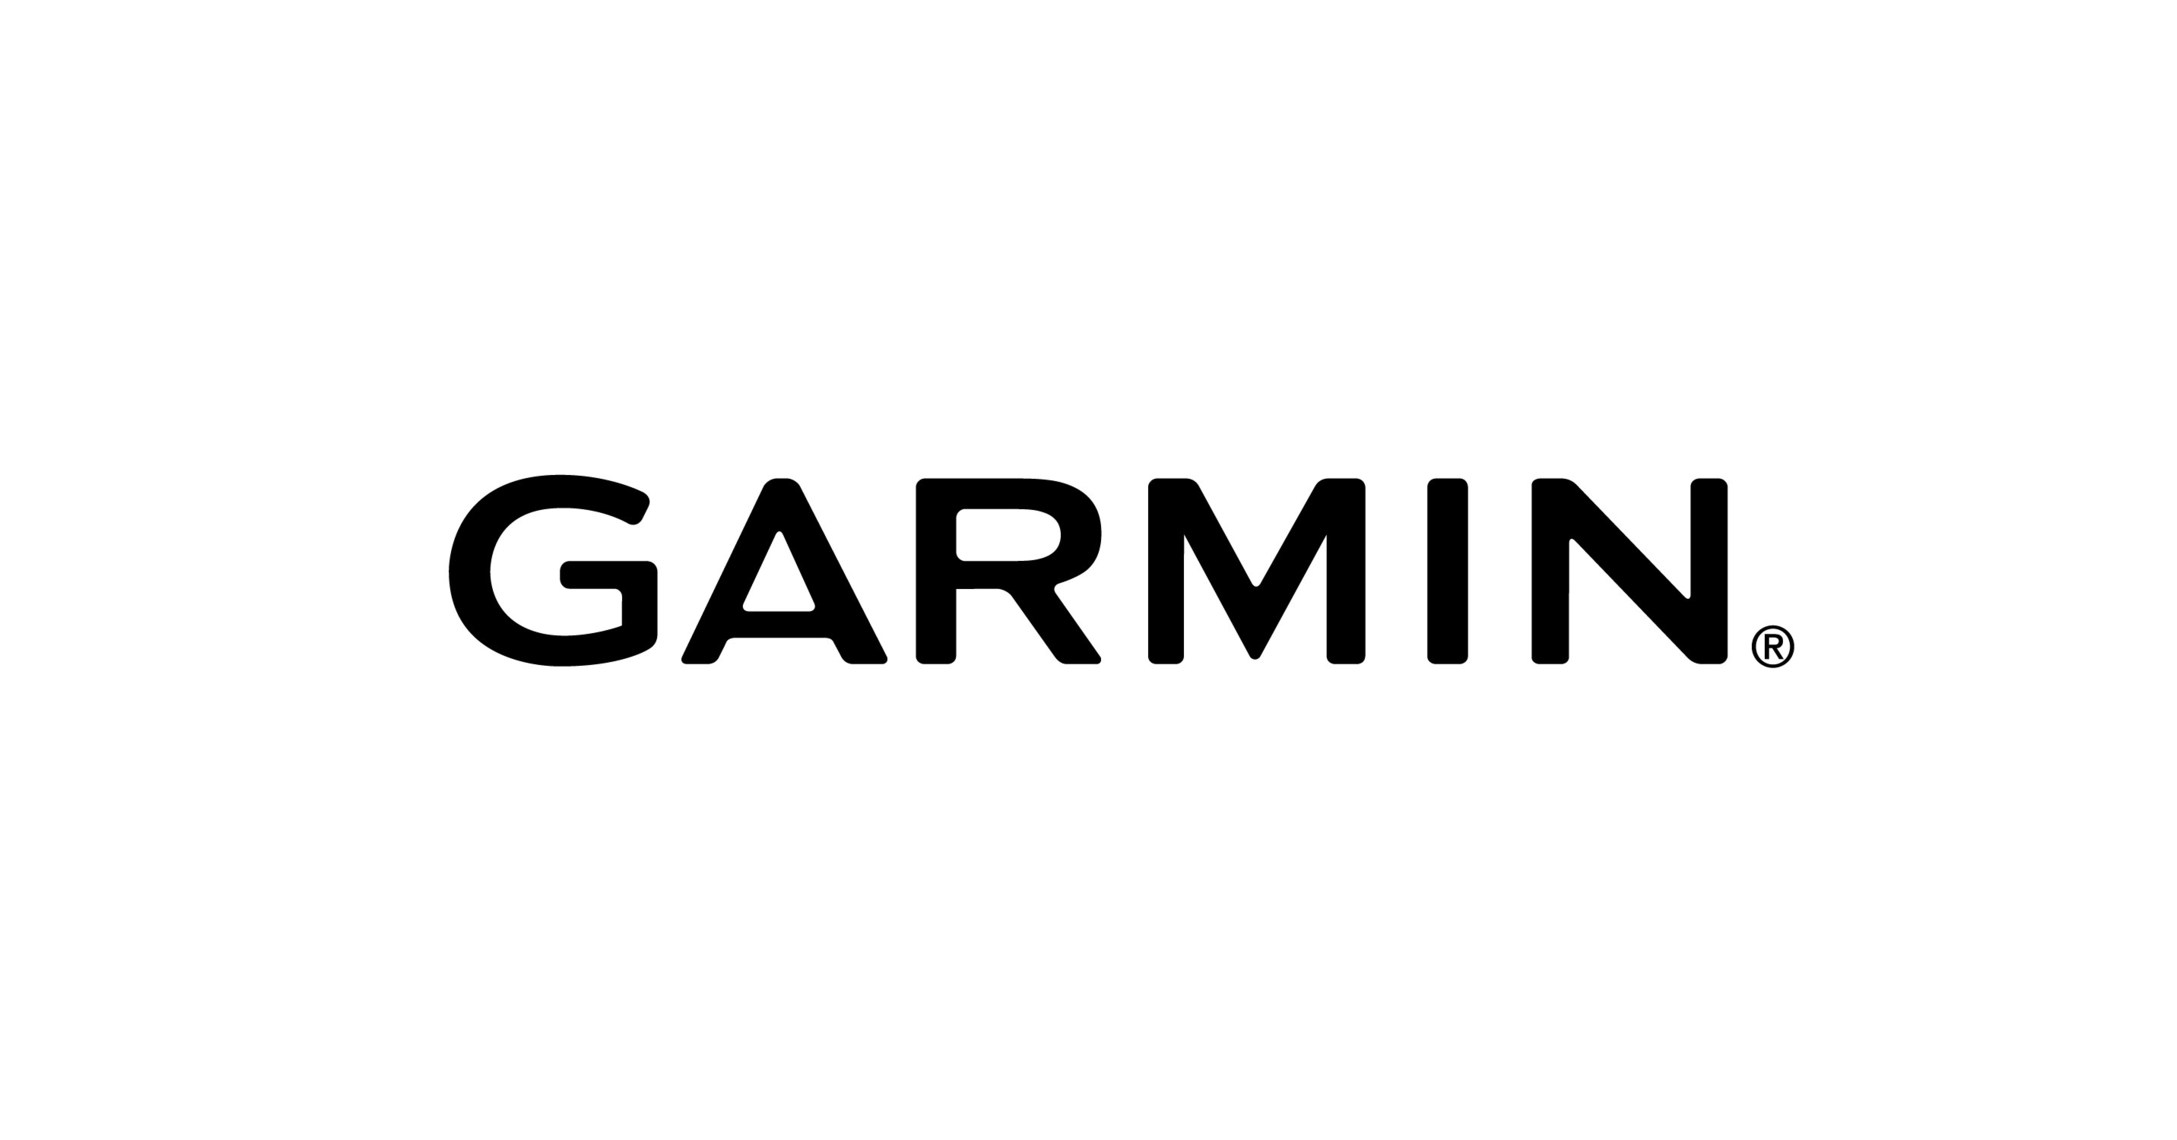 Garmin launches HRM-Fit heart rate monitor specifically designed